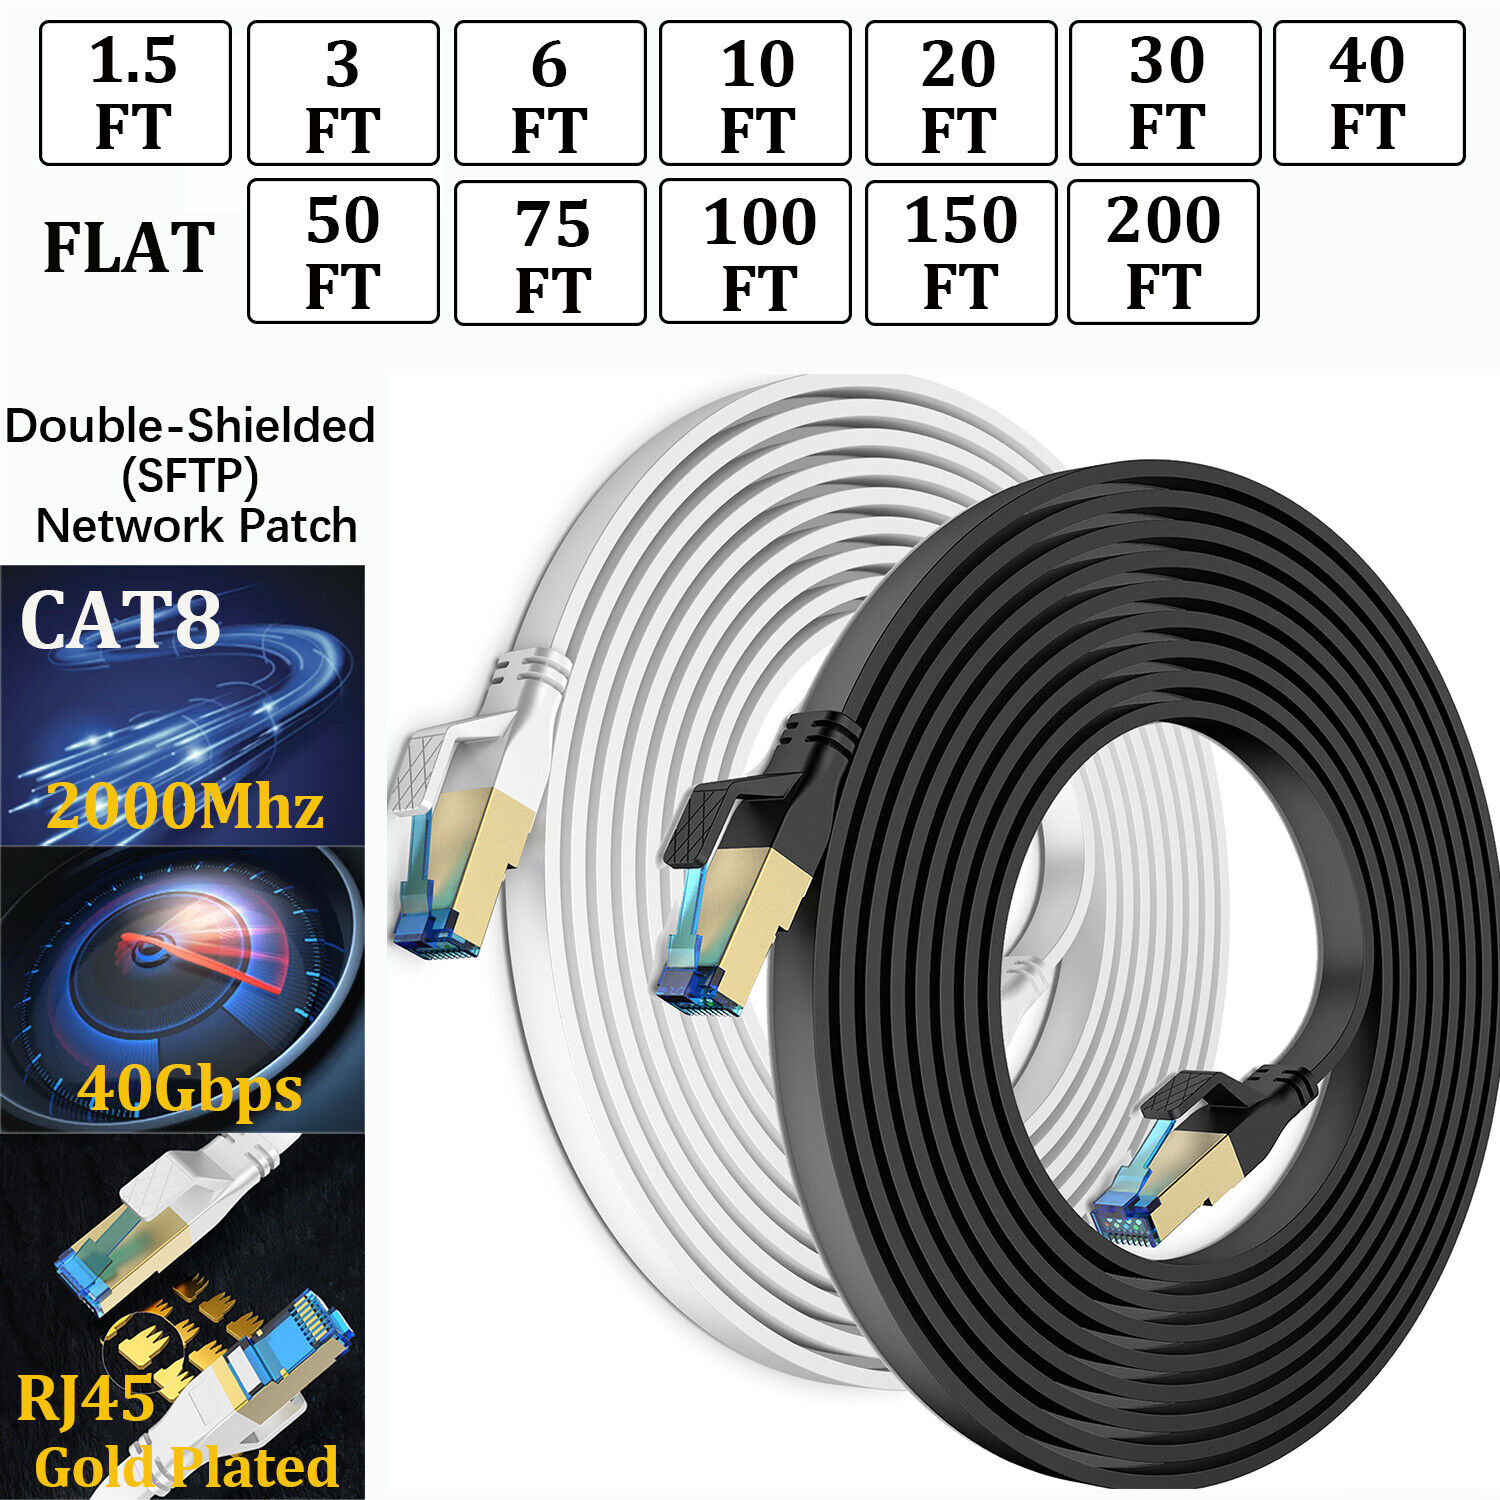 1.5FT-200FT Heavy Duty  Flat Cat 8 Ethernet Cable Super Speed 40Gbps/2000Mhz Lot